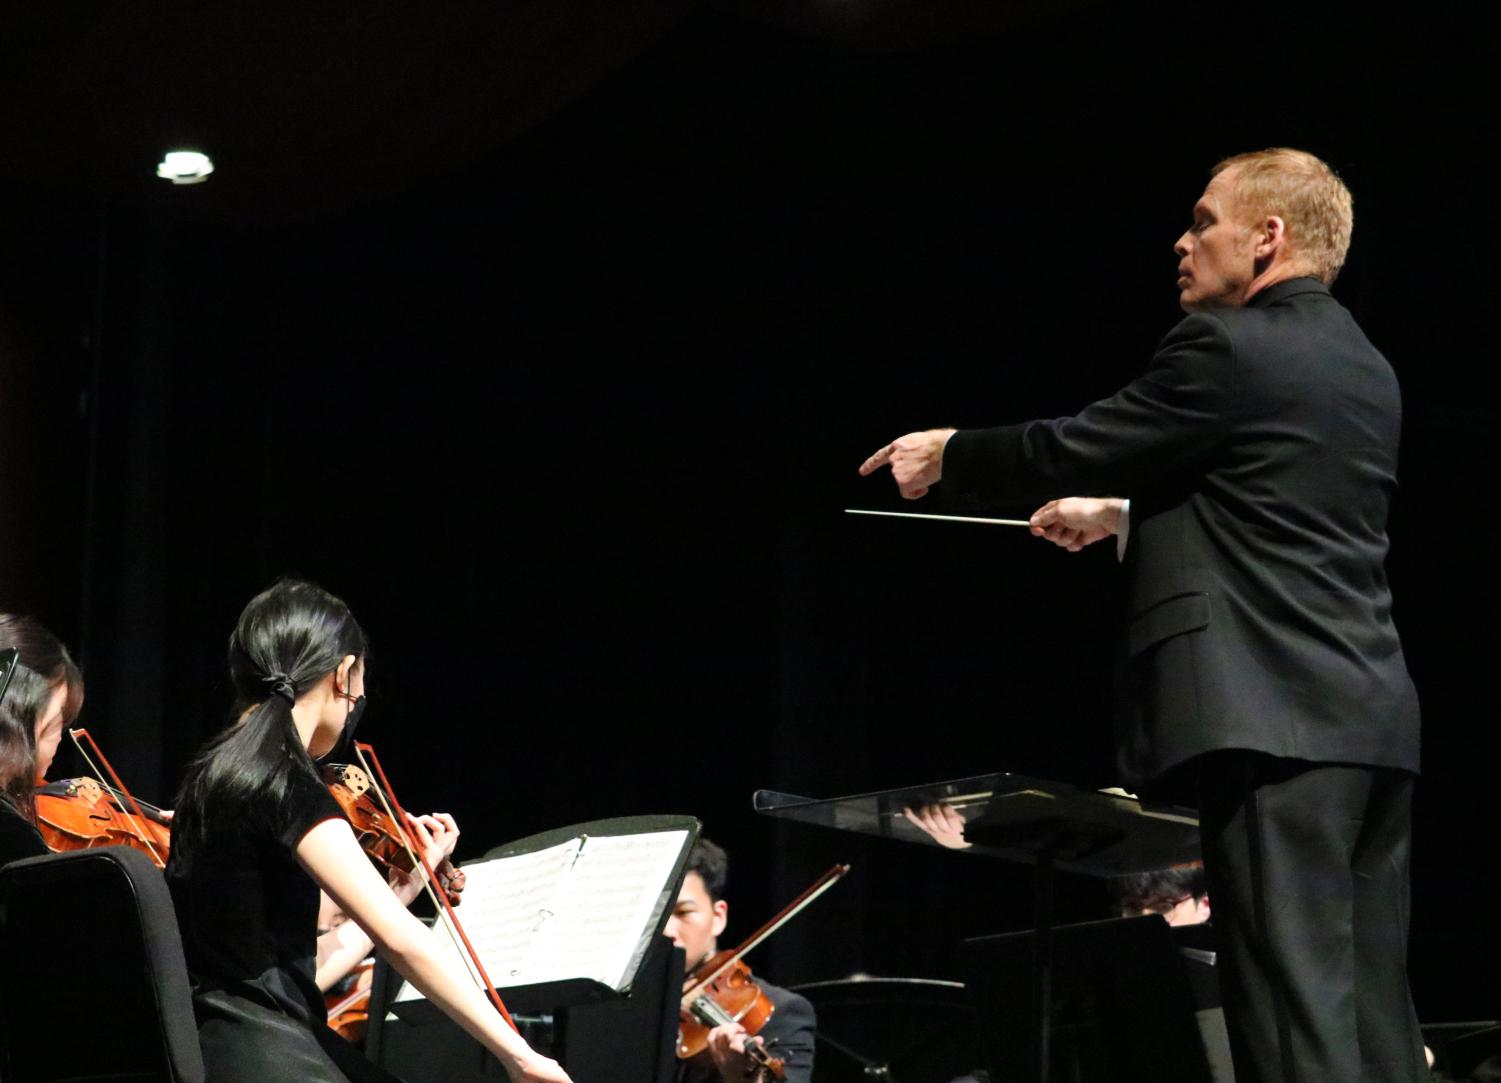 Full+Orchestra+UIL+Preview+Concert+Spotlights+Student+Collaboration+in+Music